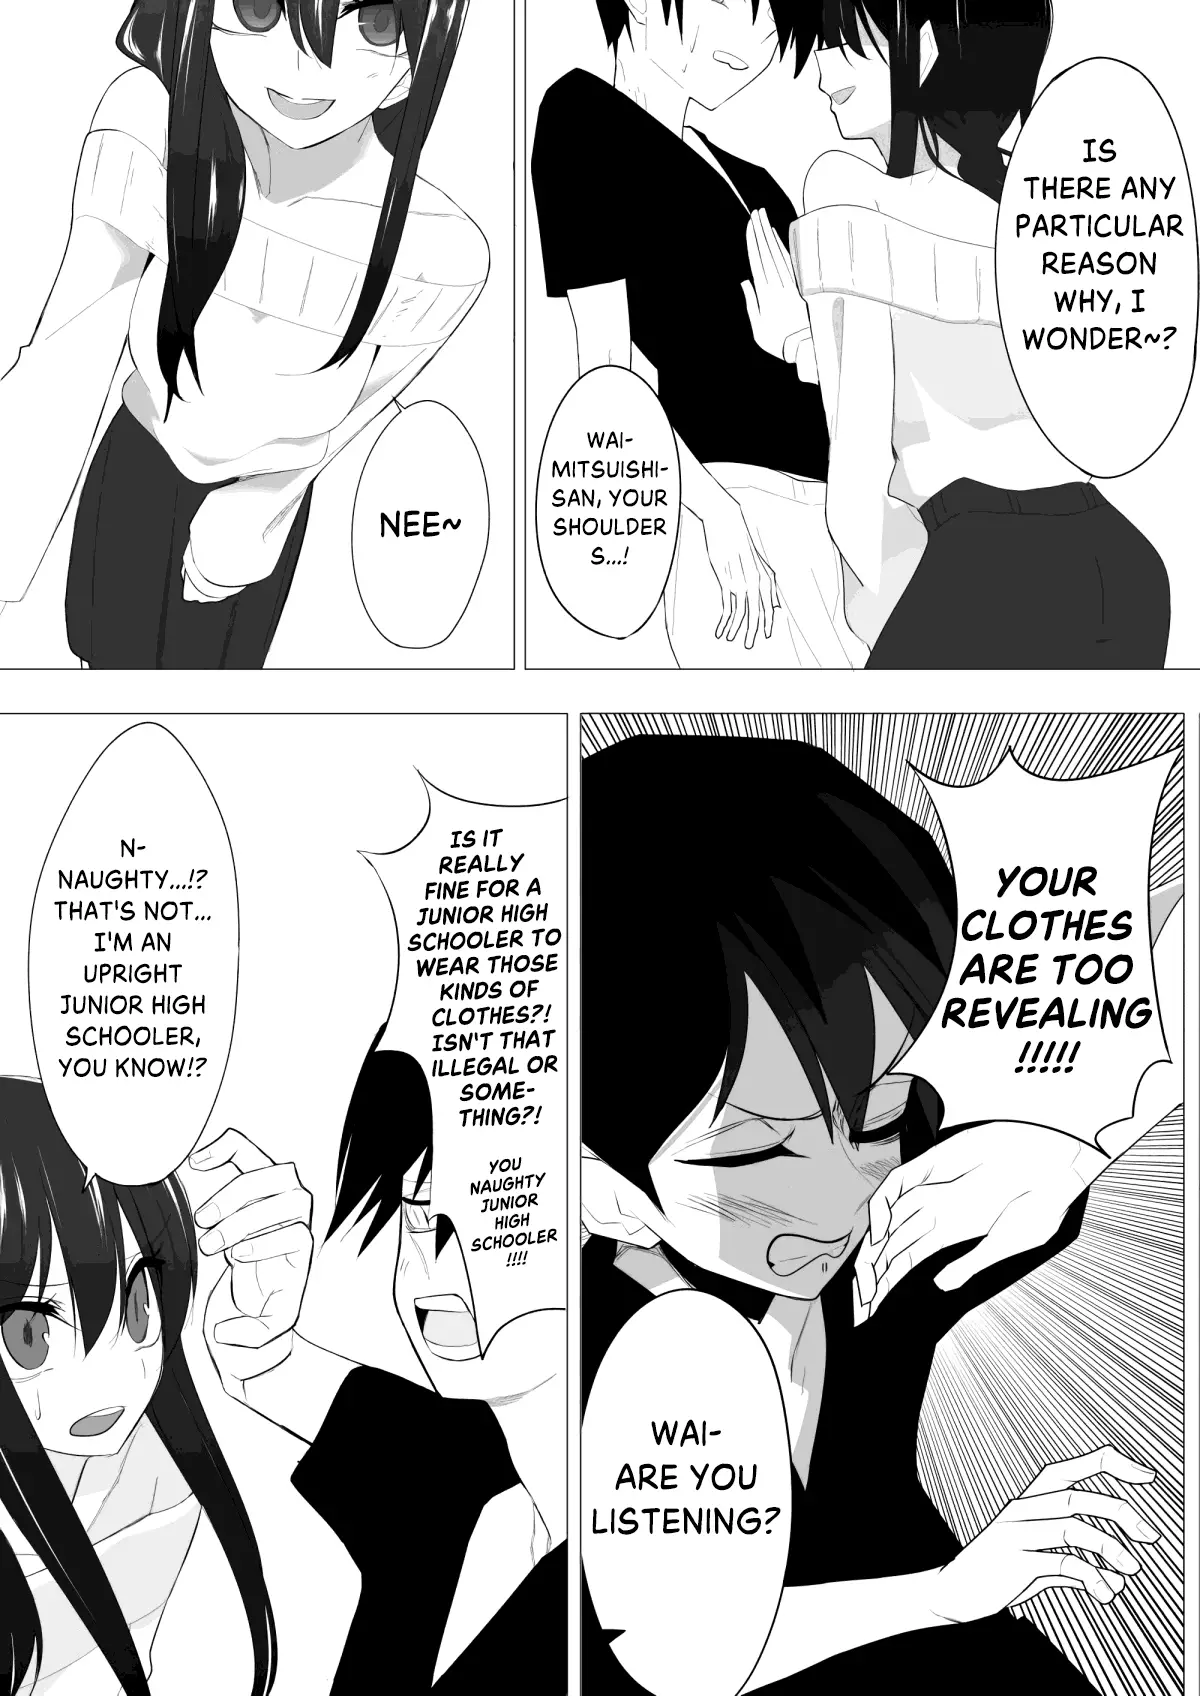 Mitsuishi-San Is Being Weird This Year - 9 page 8-2a124d86